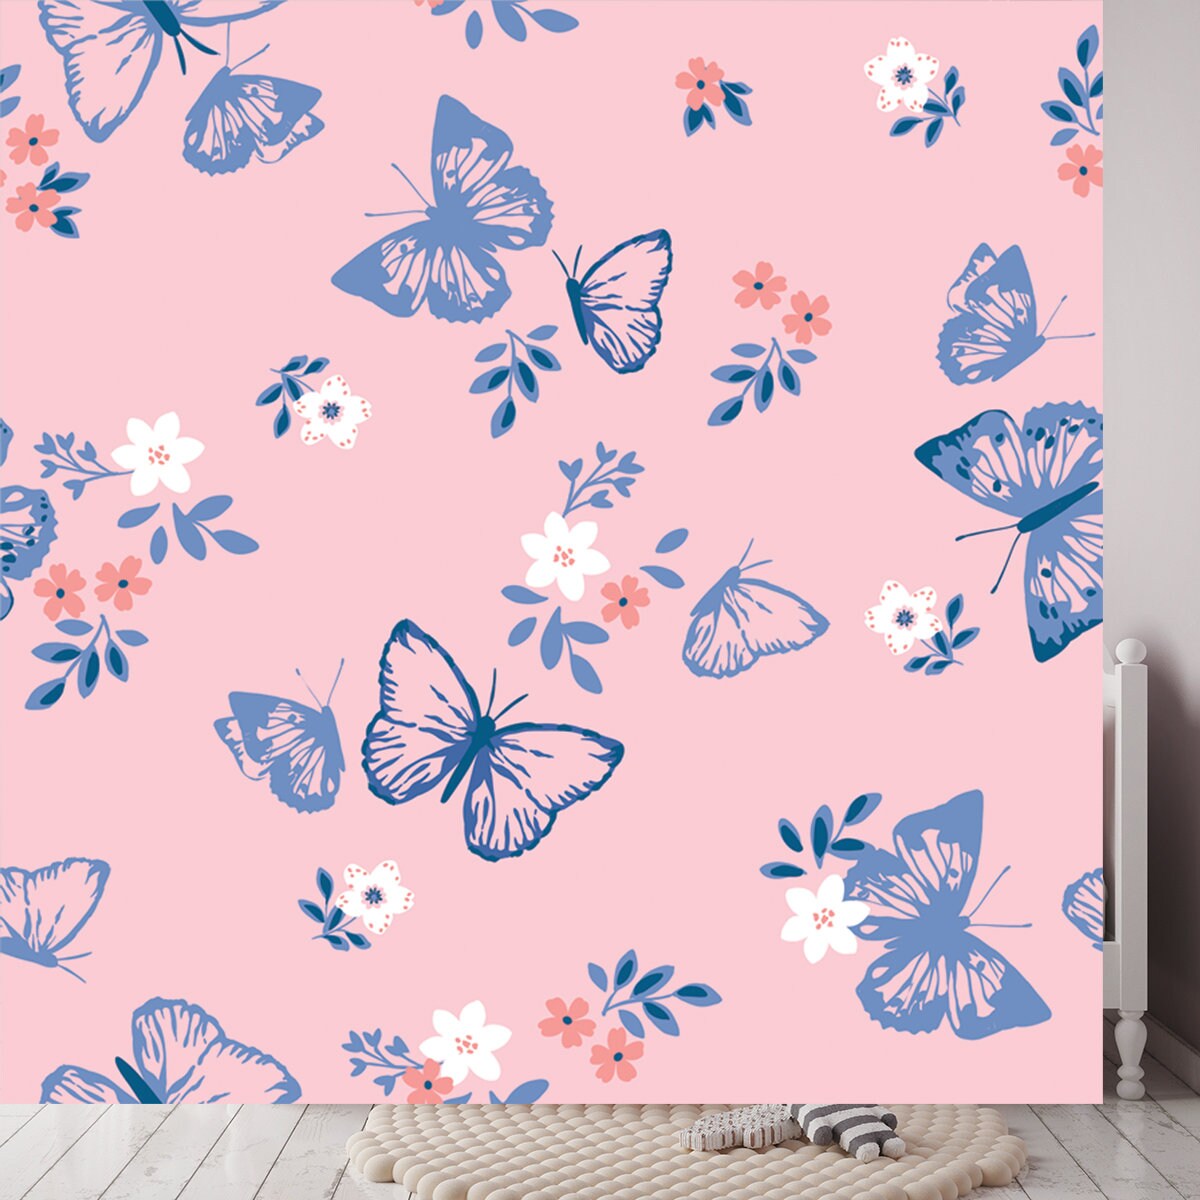 Blue Butterflies with Flowers on Pink Background Wallpaper Girl Bedroom Mural